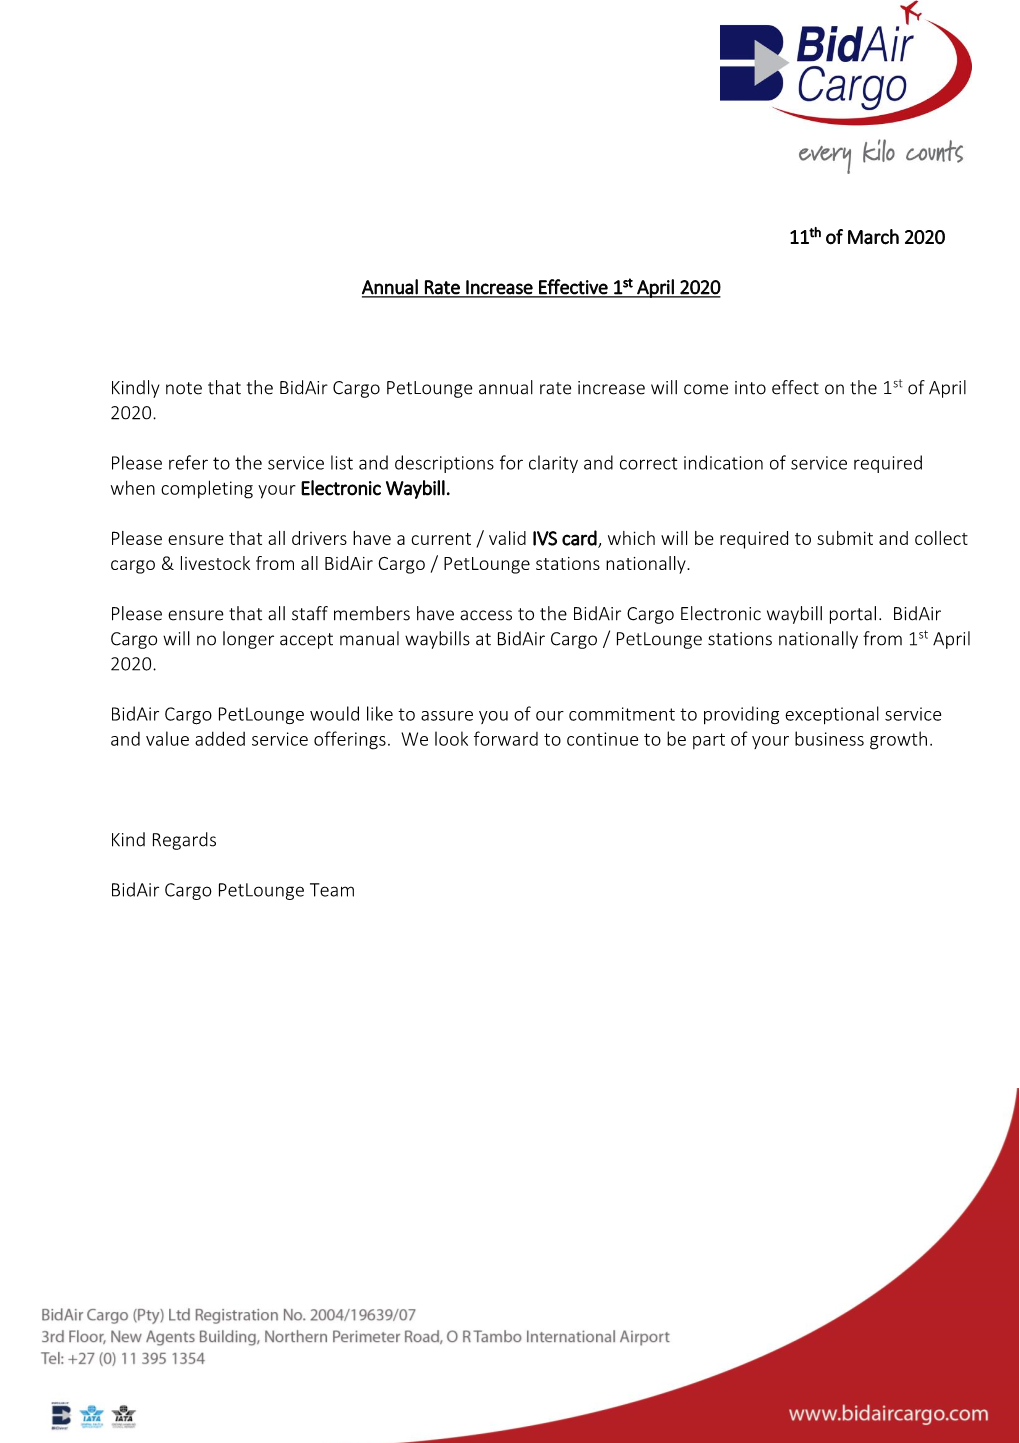 11Th of March 2020 Annual Rate Increase Effective 1St April 2020 Kindly Note That the Bidair Cargo Petlounge Annual Rate Increas